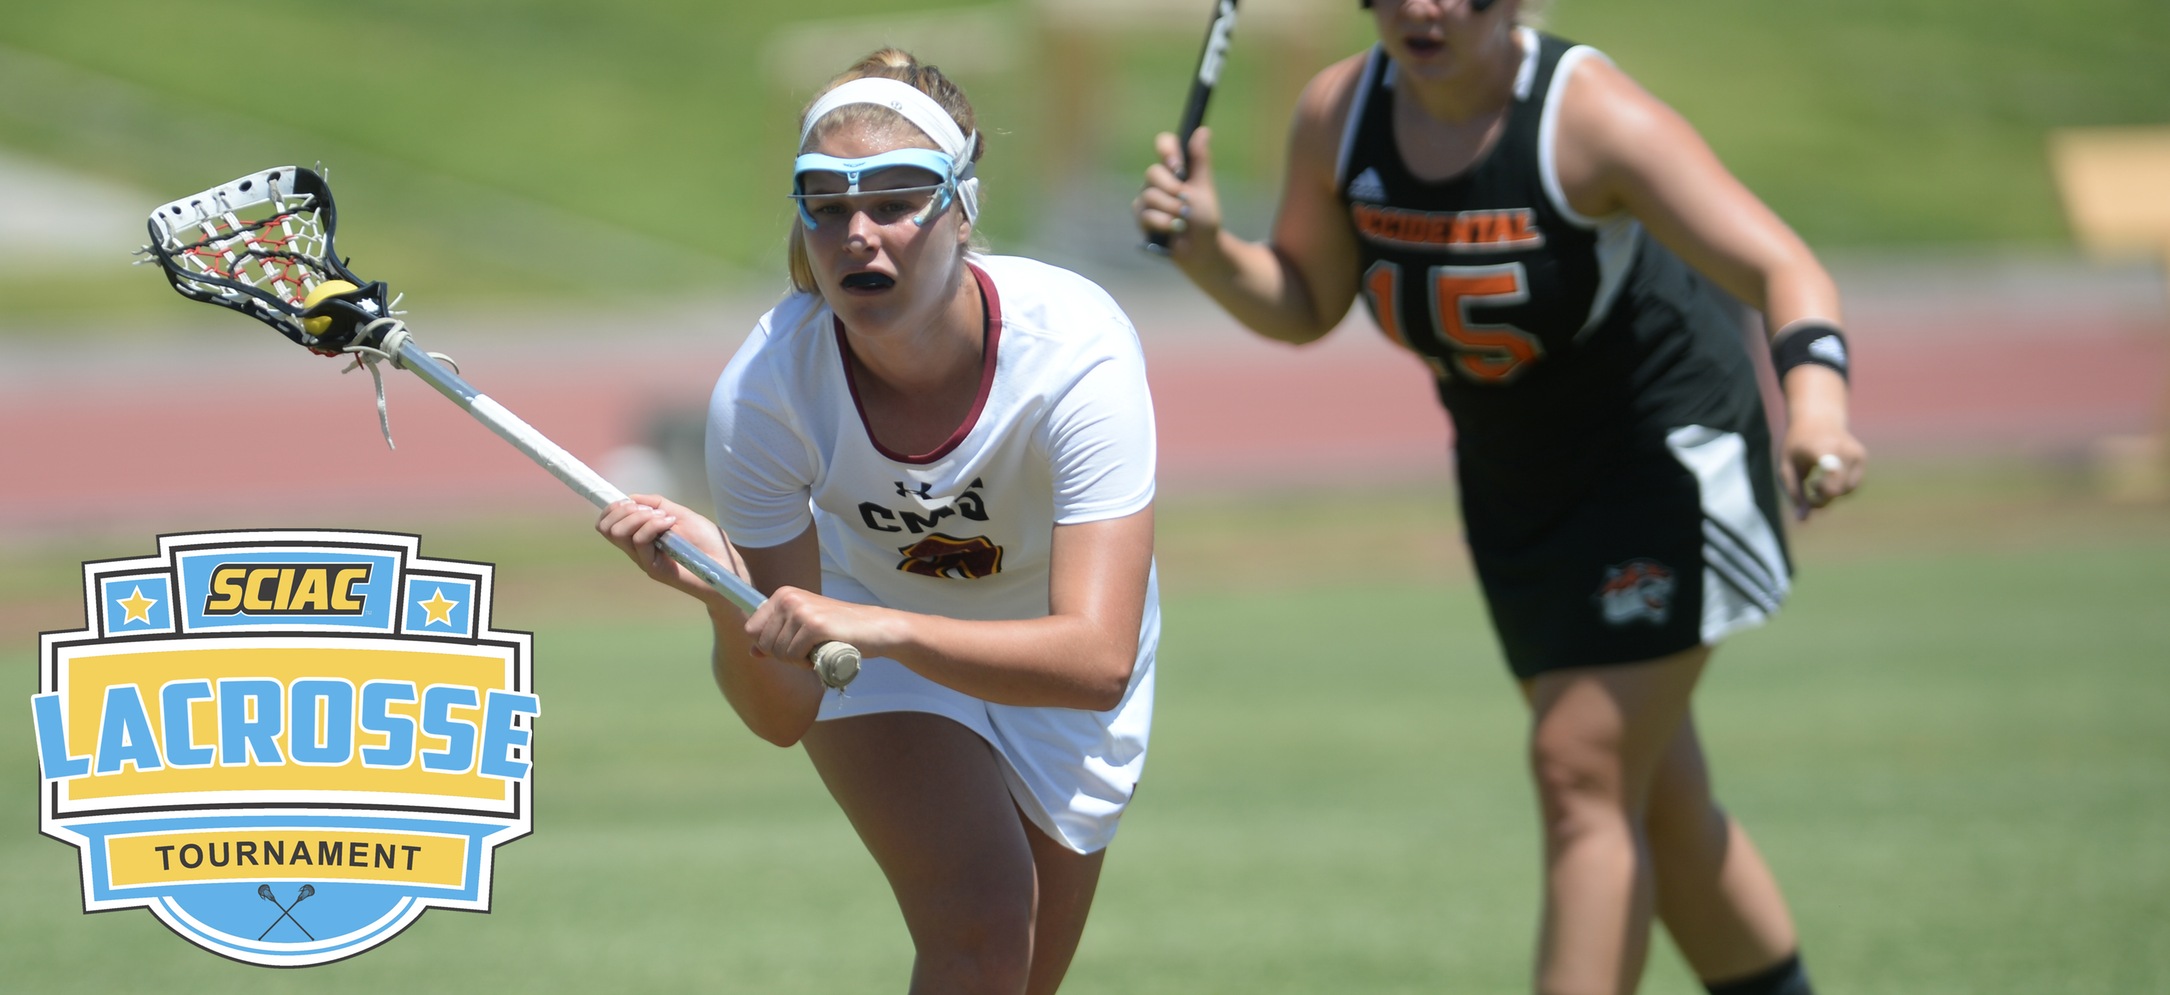 Athenas aim to maintain dominance under higher stakes